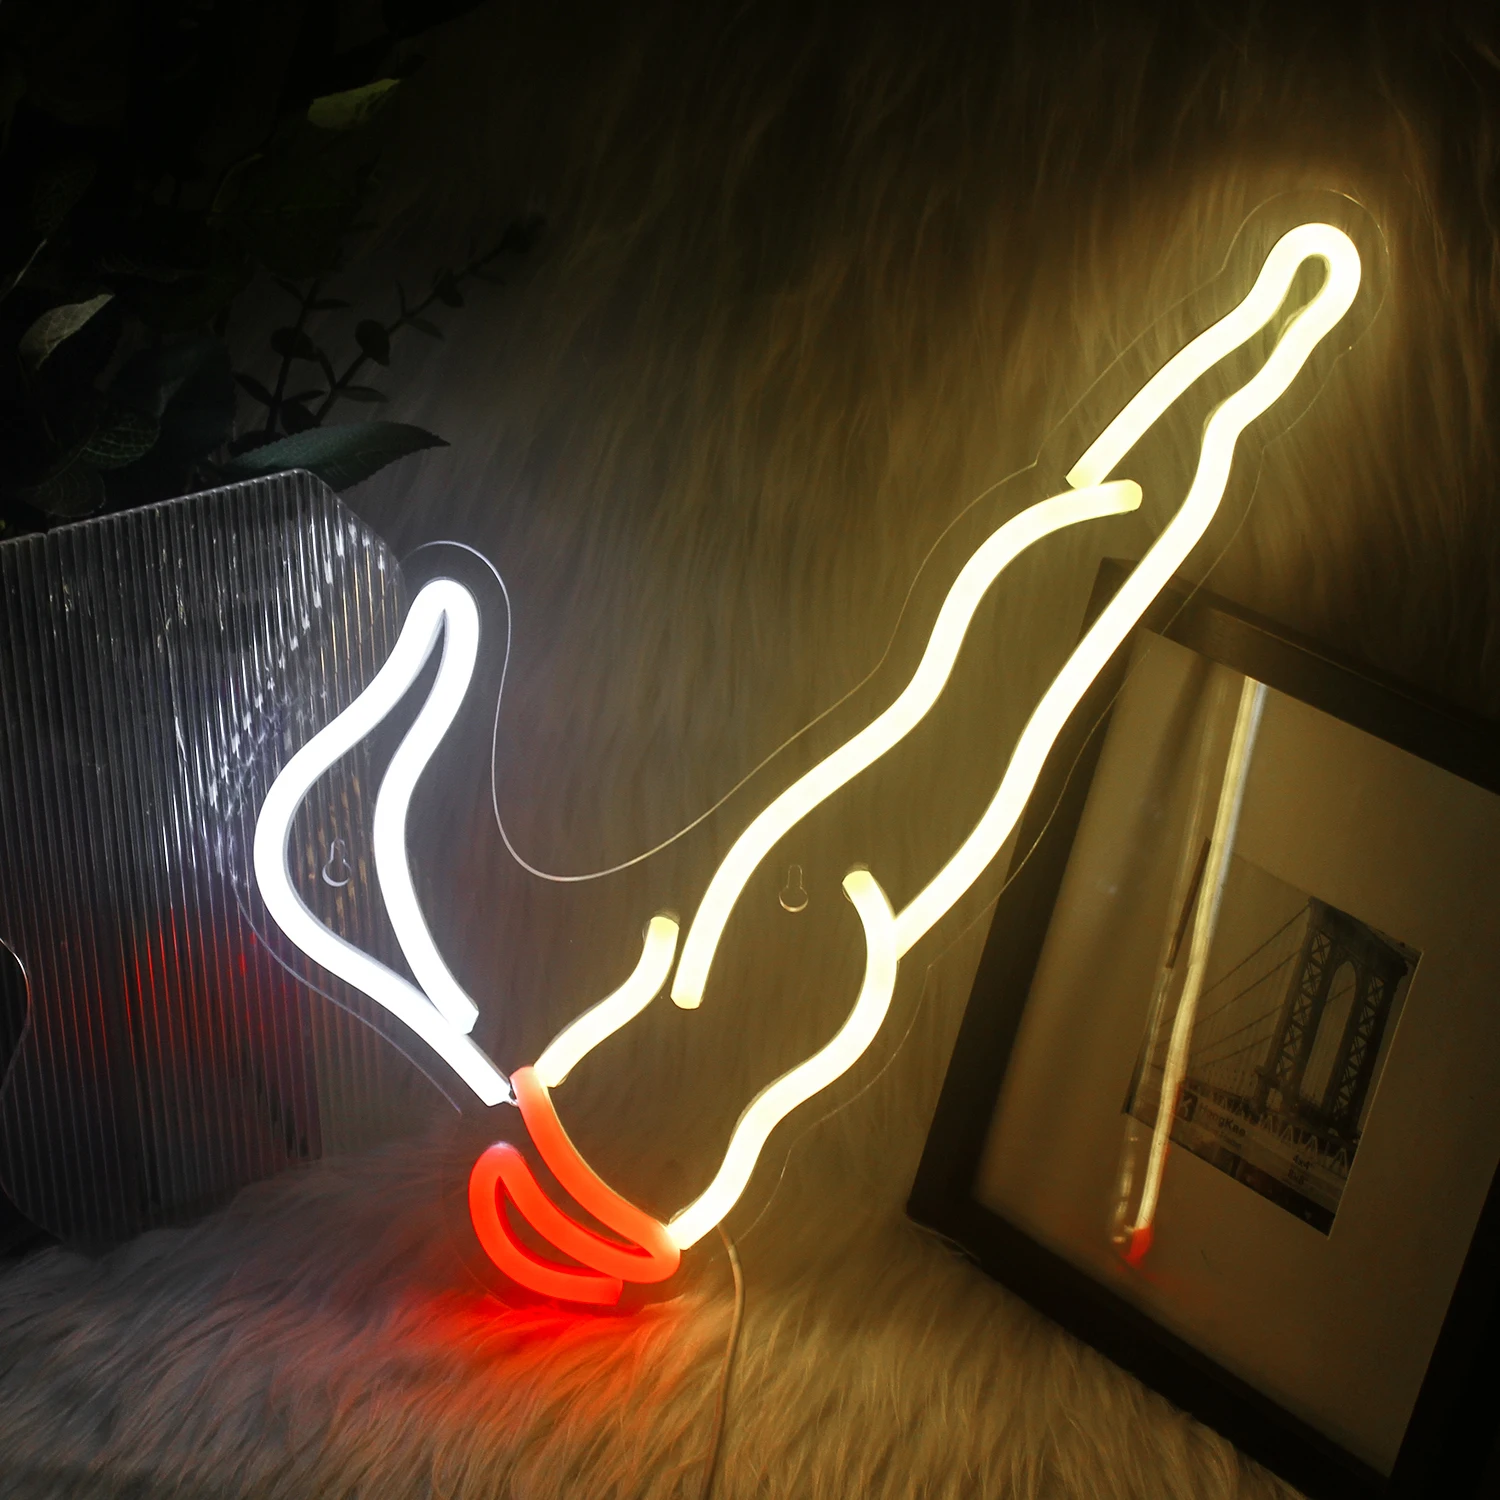 Ineonlife Smoking Cool Neon Sign LED Lighting Indoor Art Hanging Wall Decorations For Festive Party Room Bar Bedroom Restaurant ineonlife neon lights hey baby sign led lamps wedding proposal party art decorations children birthday room colour lights